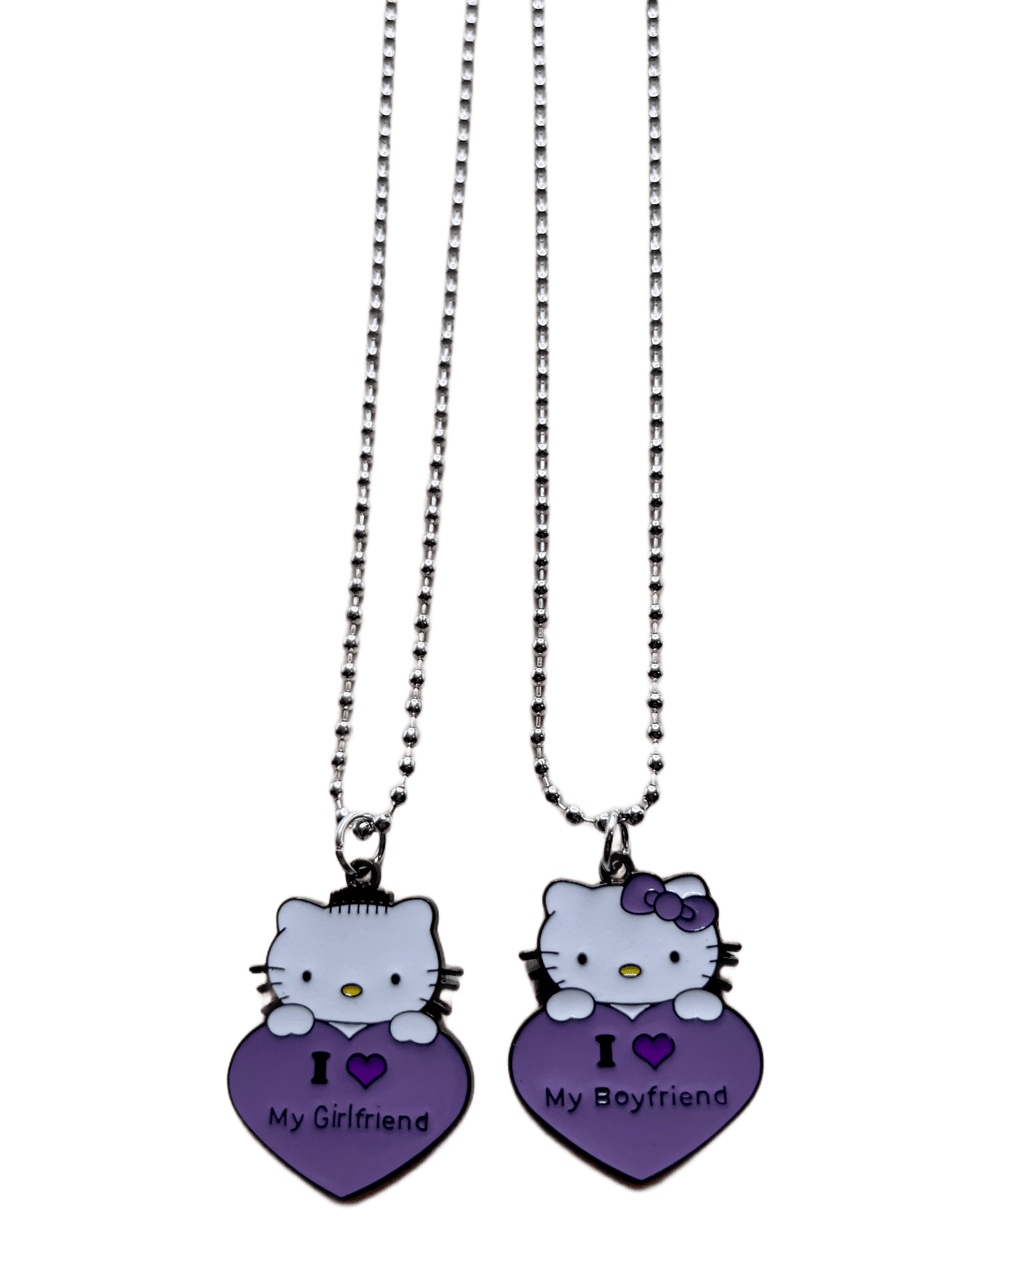 Couples hello kitty necklaces ♡